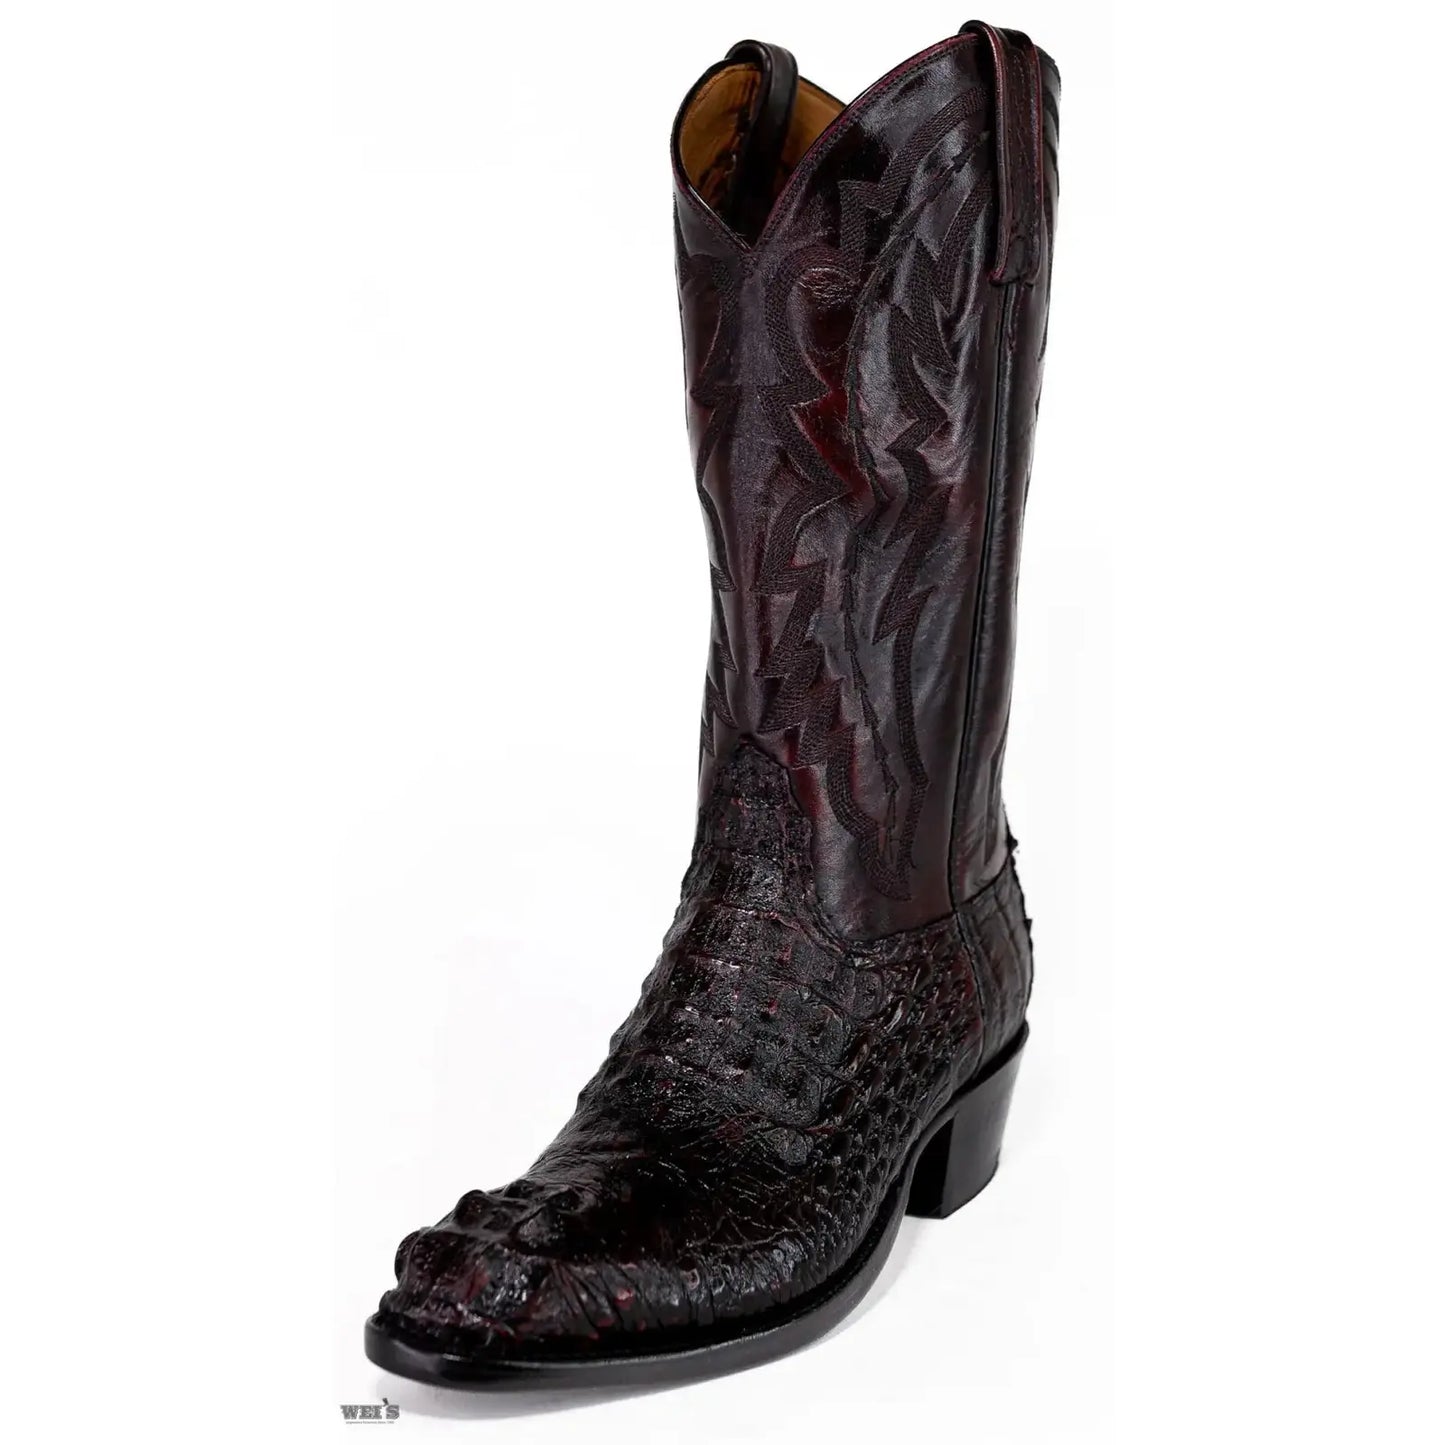 Lucchese 2000 Men's Cowboy Boots 13" Exotic Caiman/Deer T3034.R4